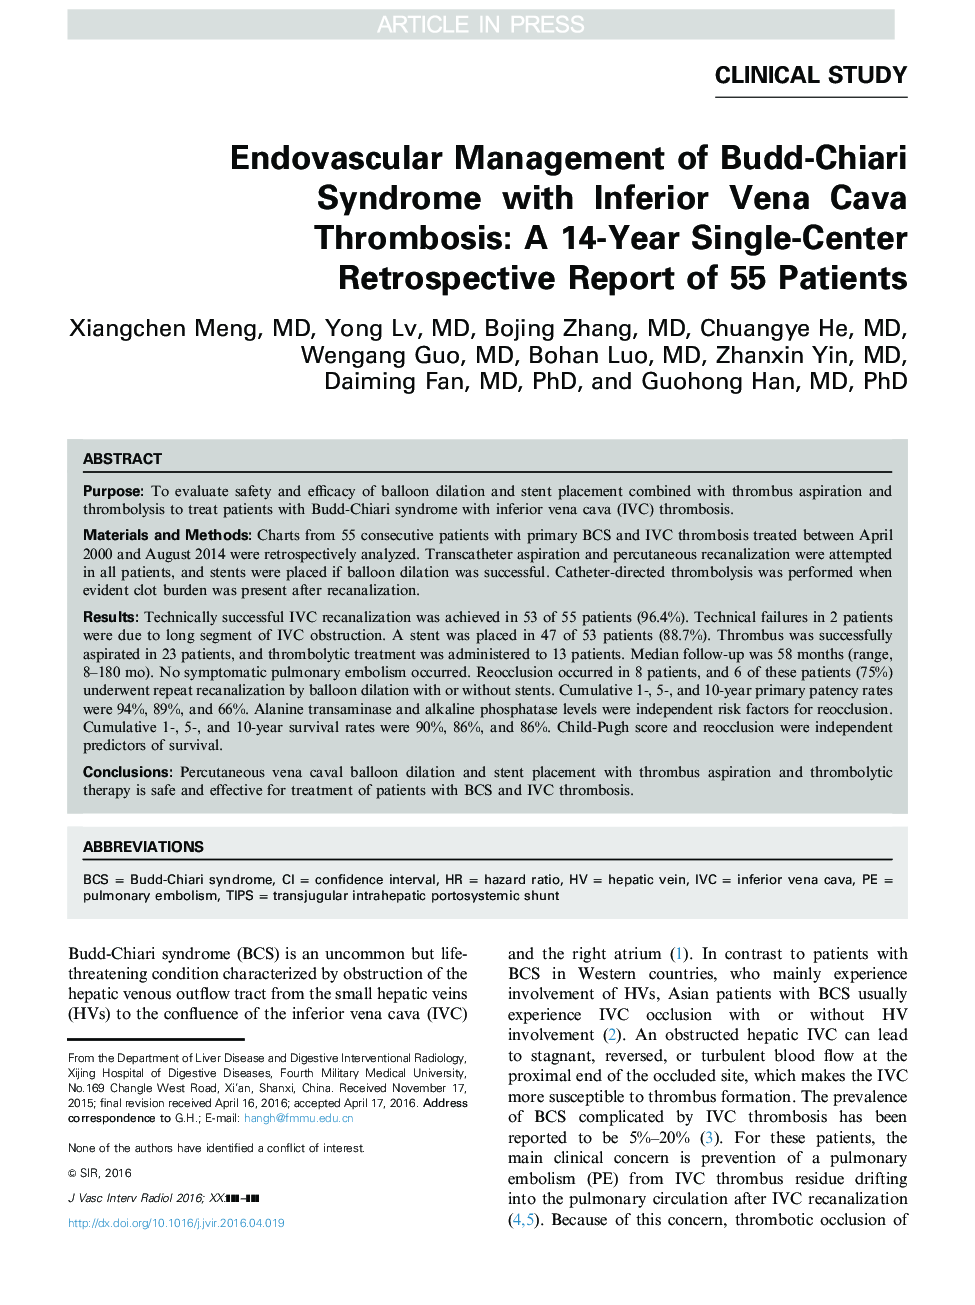 Endovascular Management of Budd-Chiari Syndrome with Inferior Vena Cava Thrombosis: A 14-Year Single-Center Retrospective Report of 55 Patients